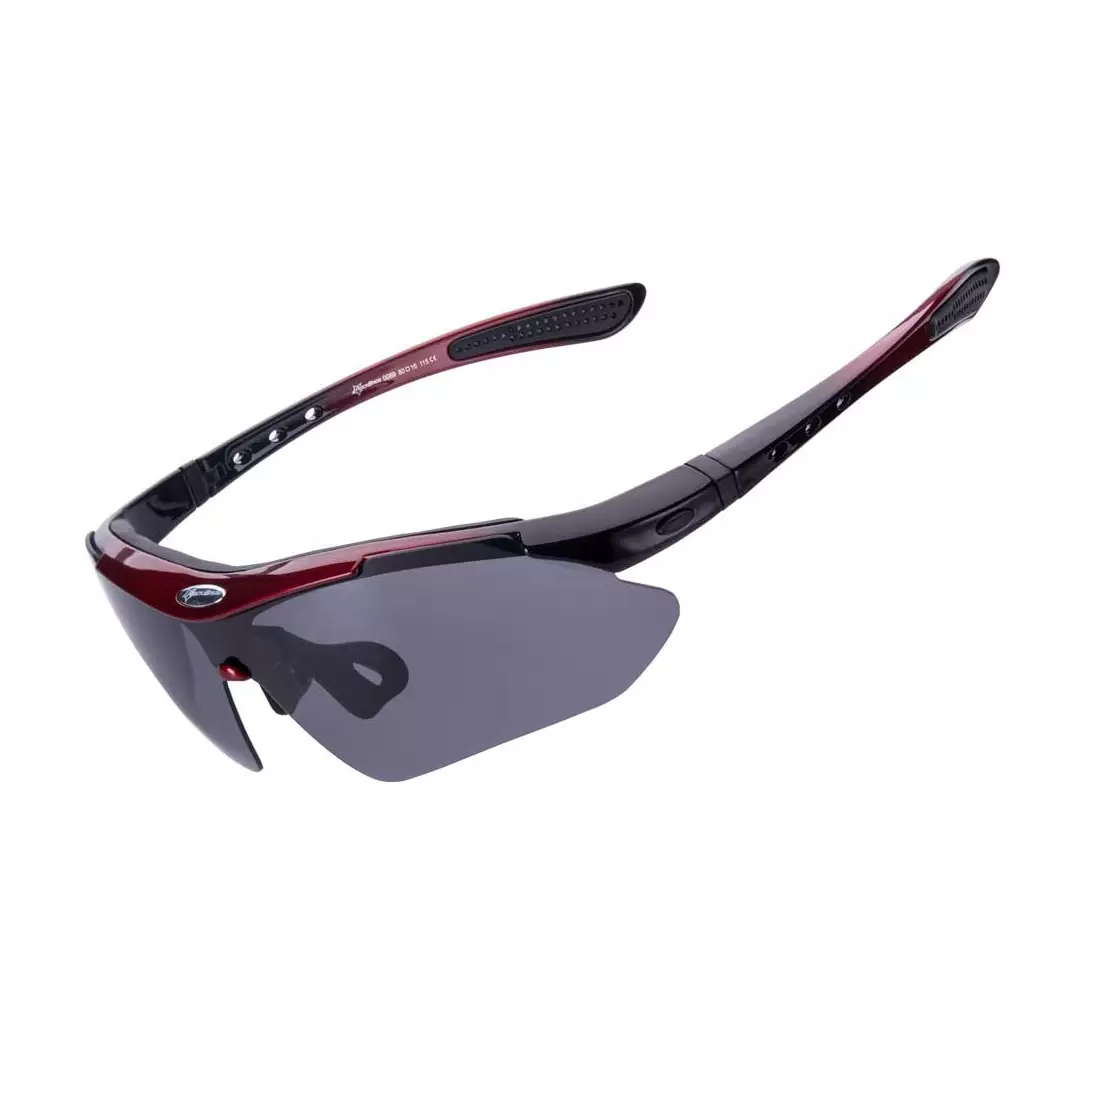 RockBros 10001 bicycle / sports goggles with polarized 5